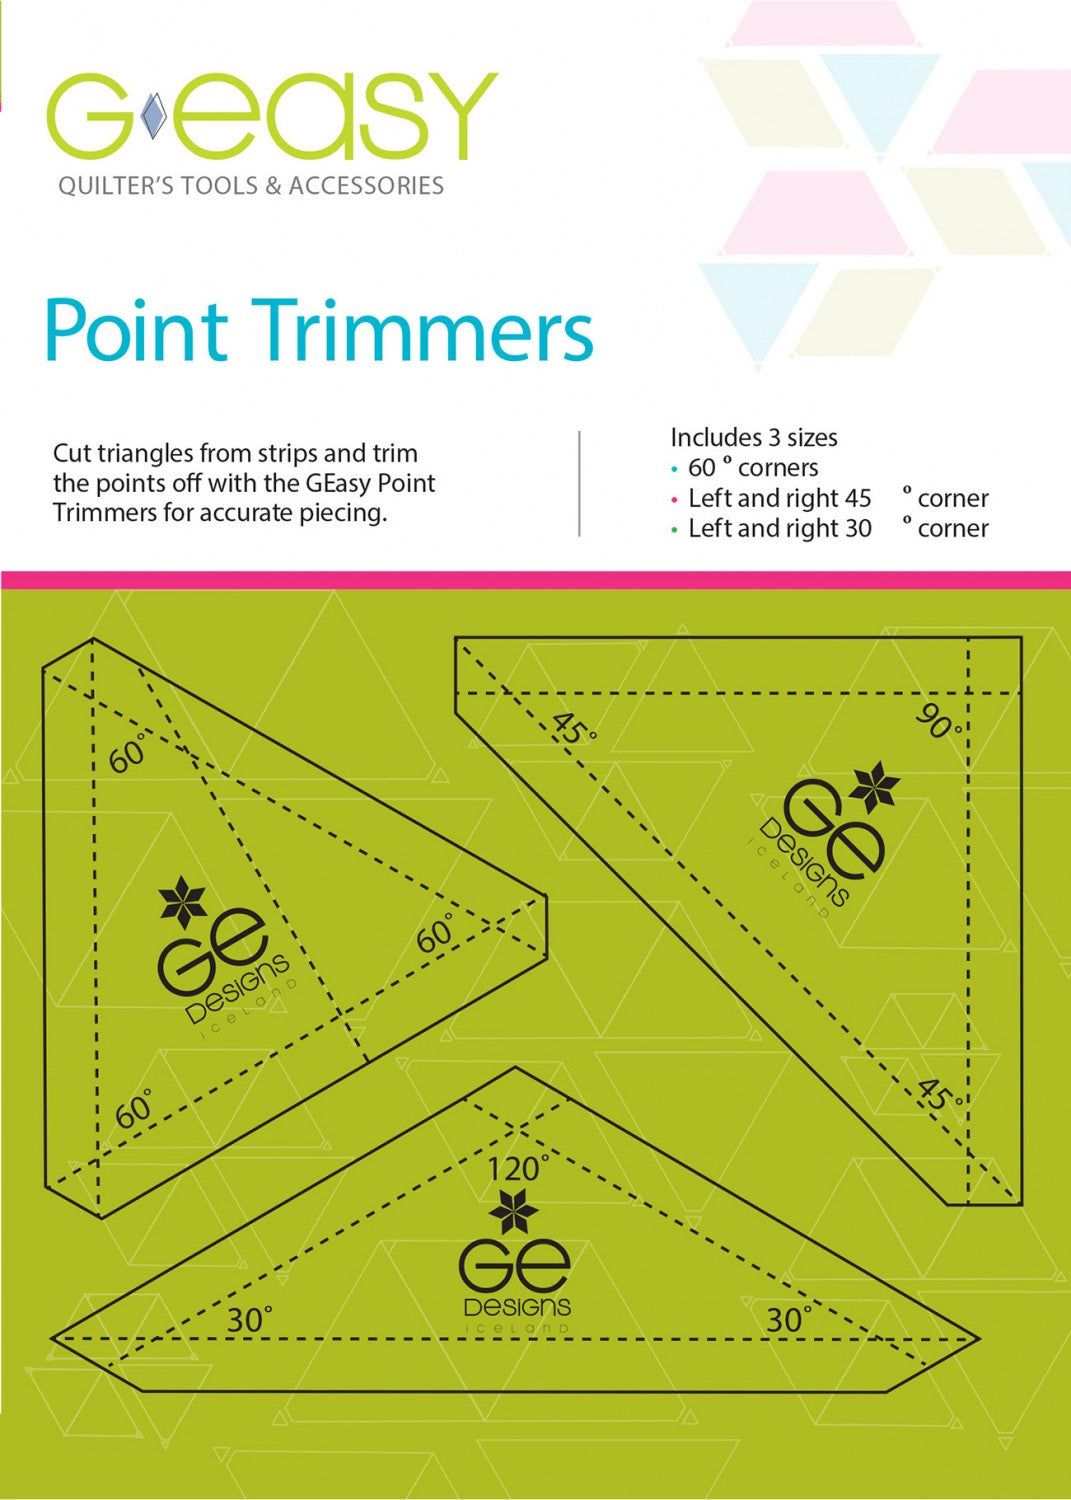 GEasy Point Trimmers - G. E. Designs